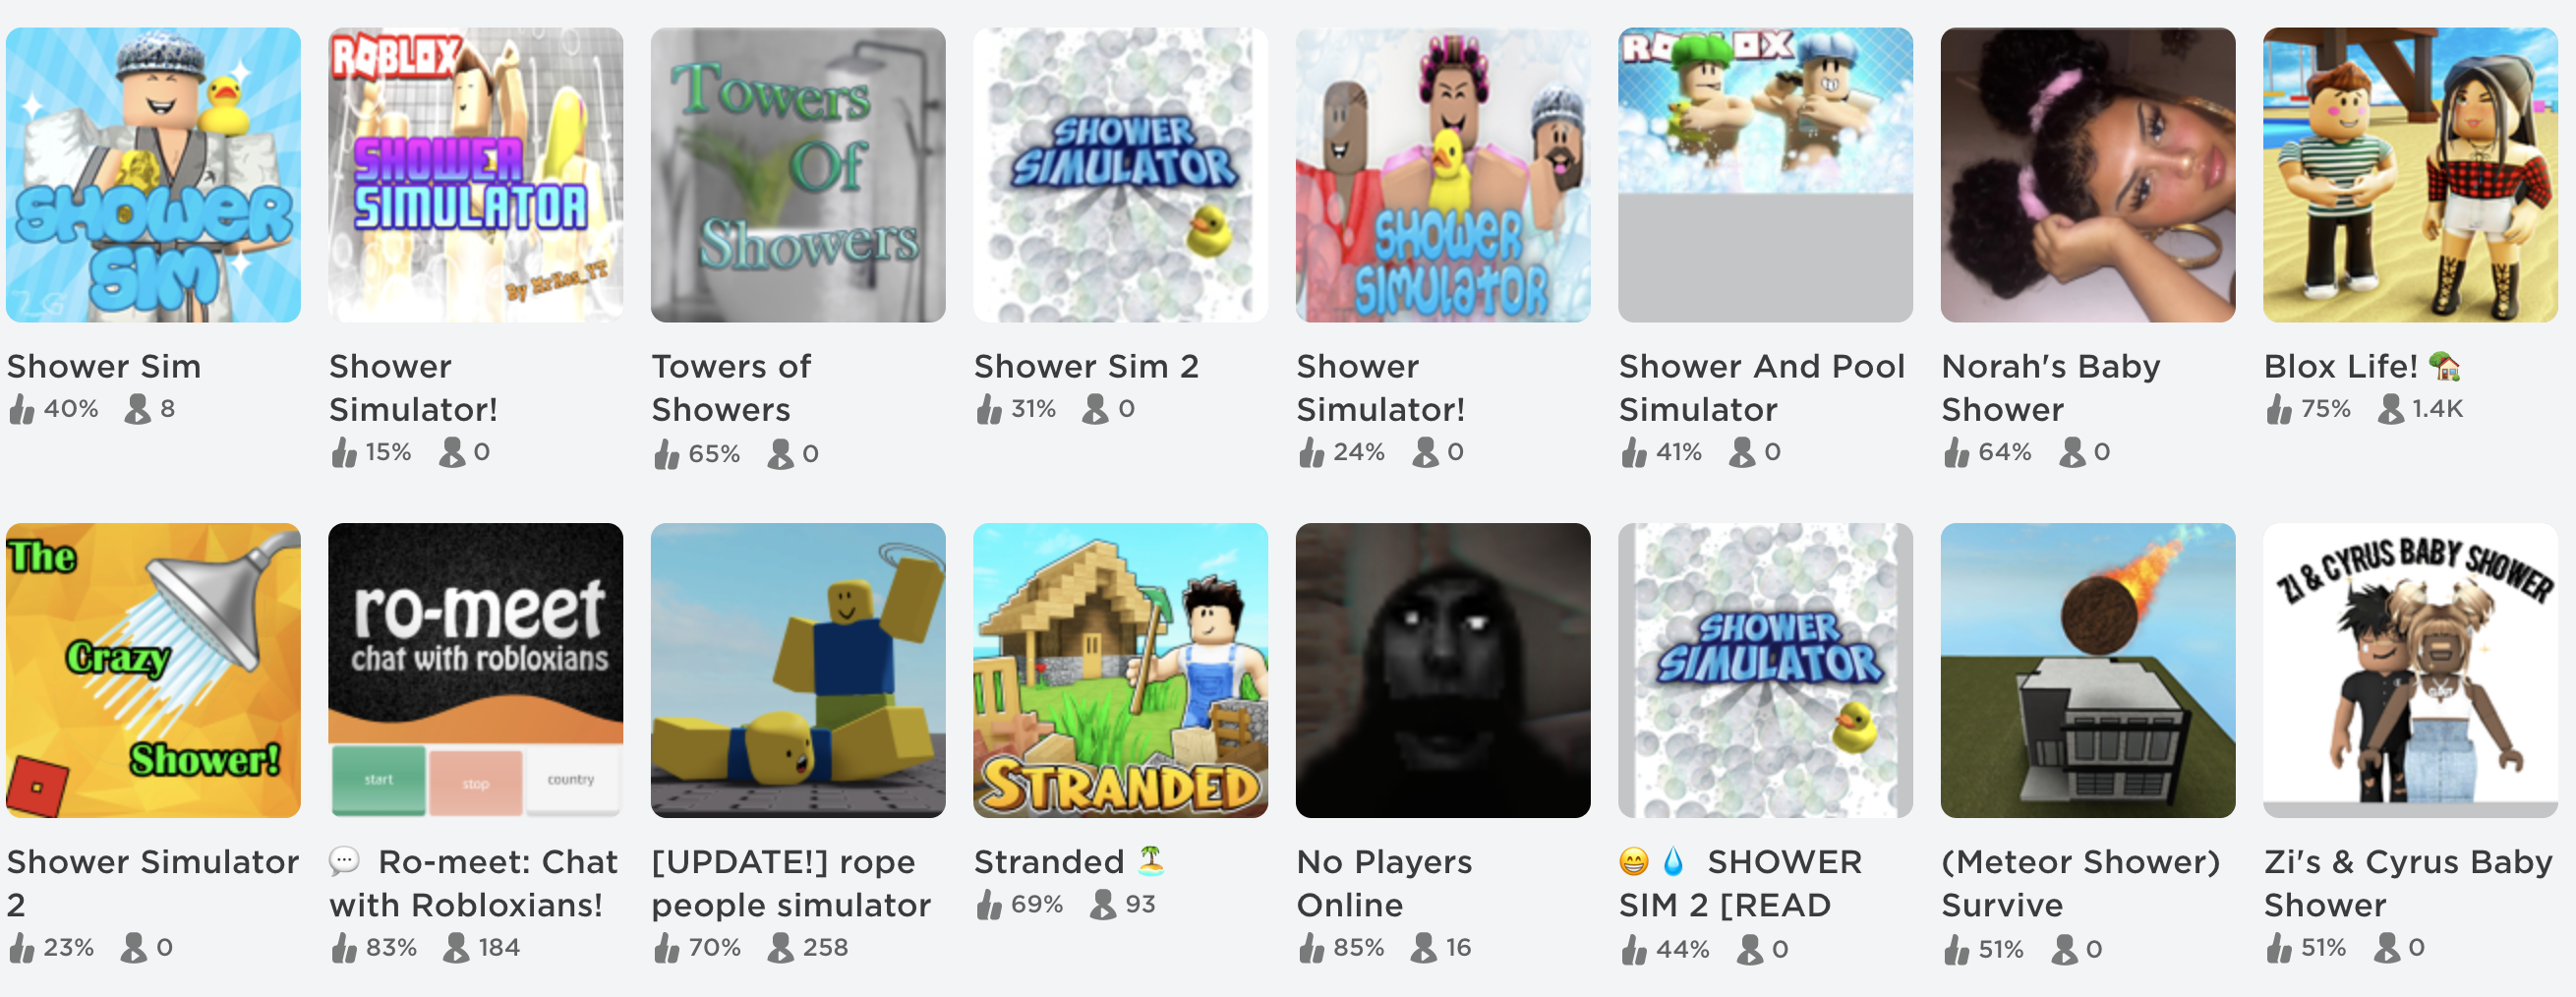 Roblox To Develop Improved Parental Controls As It Struggles With Sexually Explicit Content - how to make a sex game on roblox